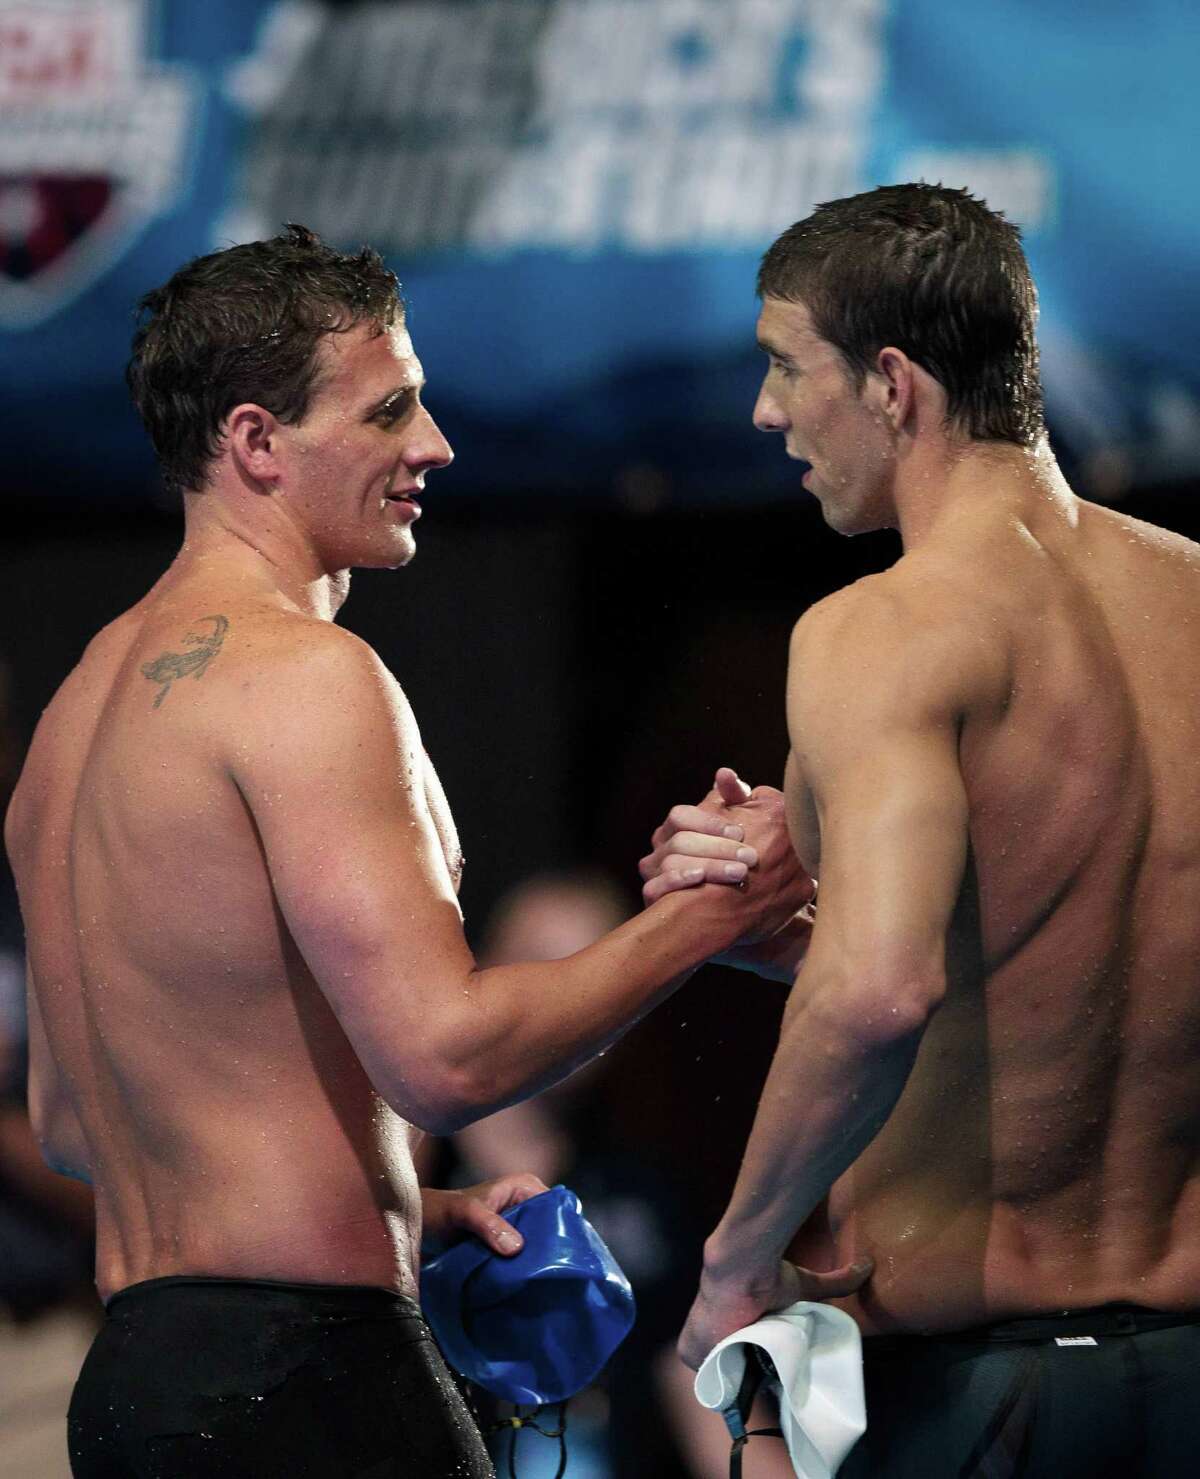 Ryan Lochte, left and Michael Phelps embrace after swimming in the men's 400-meter individual medley final at the U.S. Olympic swimming trials, Monday, June 25, 2012, in Omaha, Neb. Lochte won the race. (AP Photo/The Omaha World-Herald/Matt Miller) MAGS OUT TV OUT